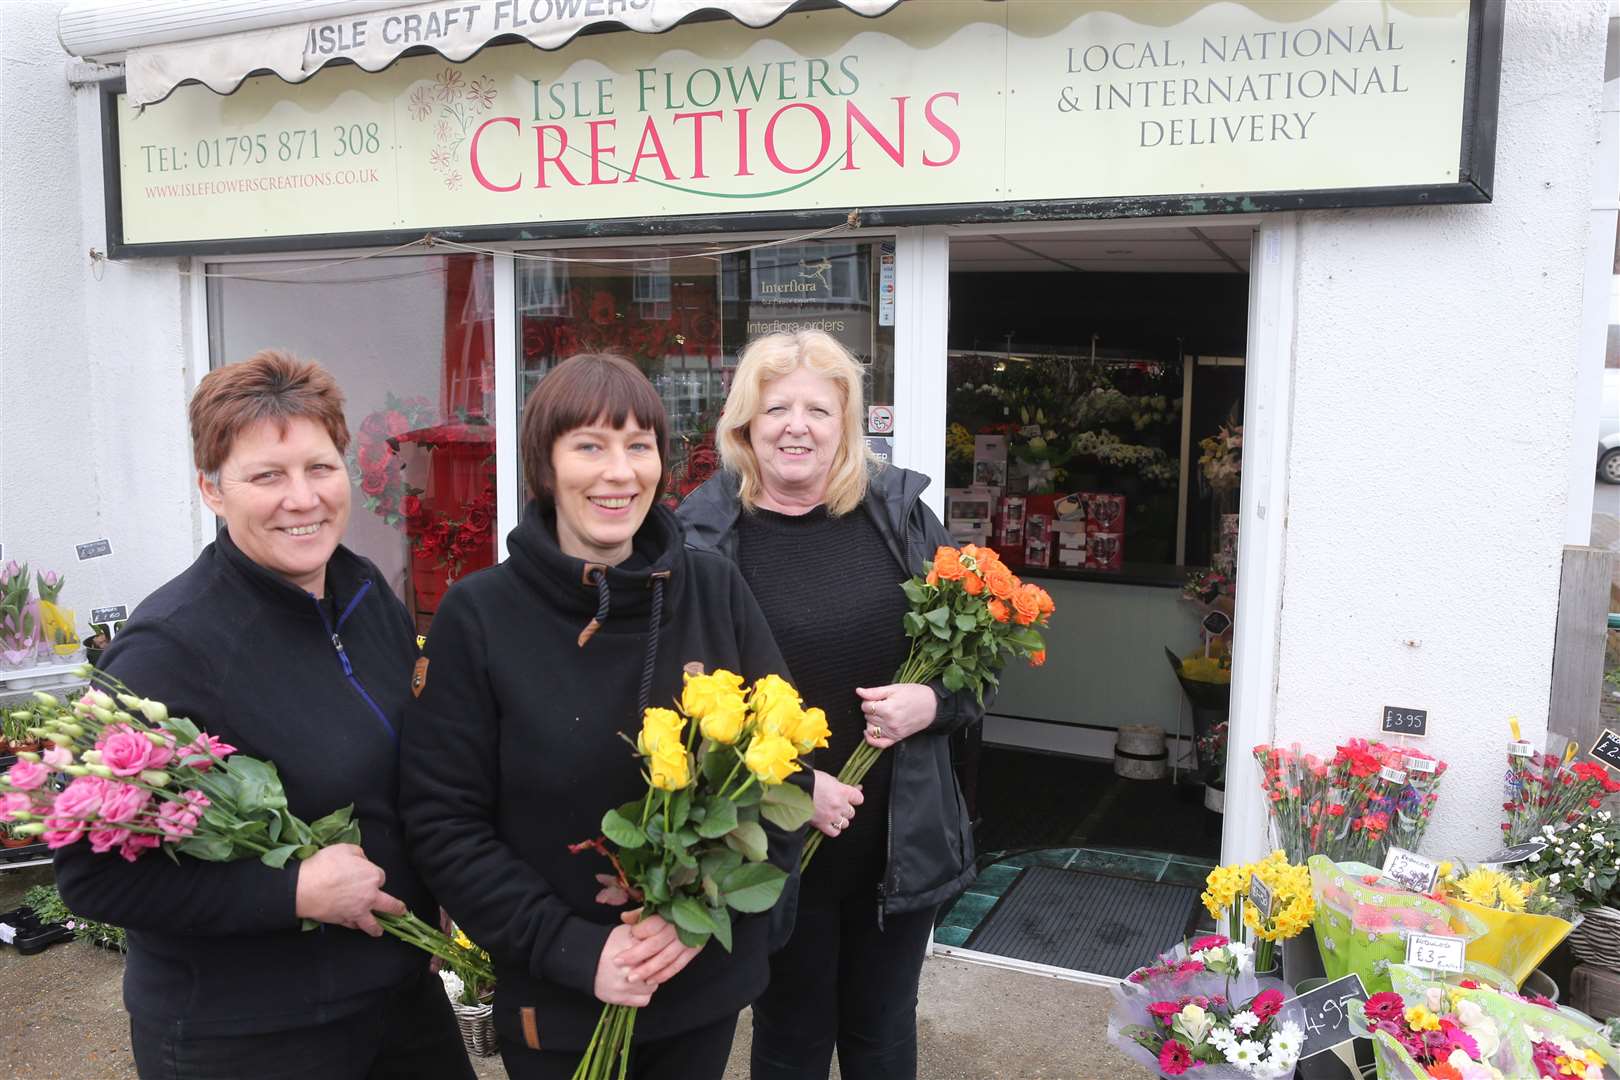 Kalina Wierszcka, centre, took over at Isle Flower Creations in 2017